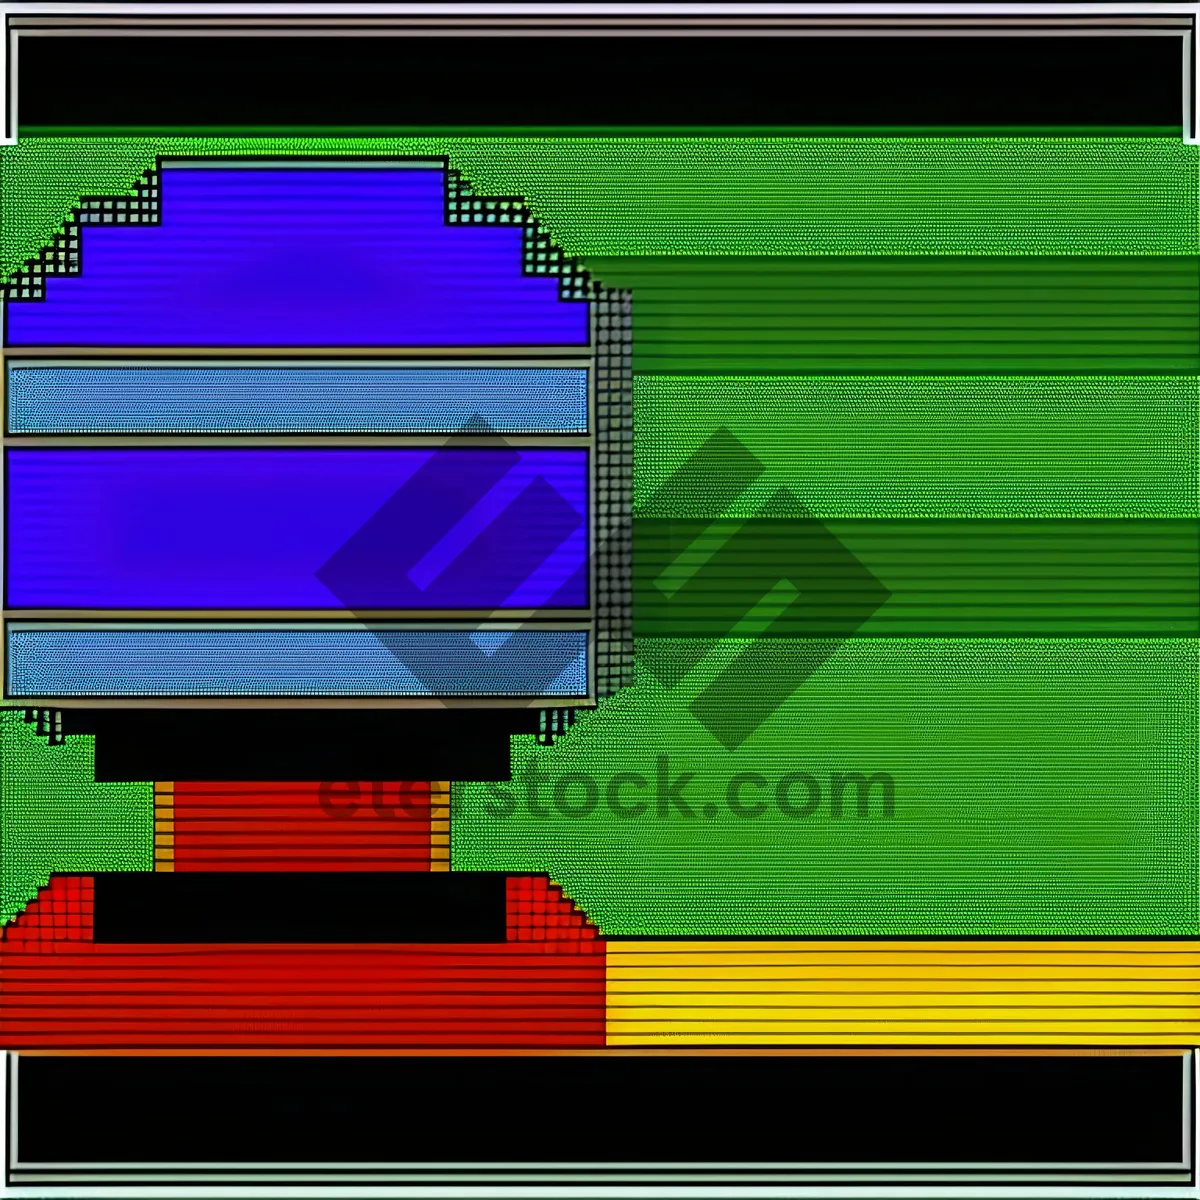 Picture of Digital LCD Monitor with Texture - Technology Equipment